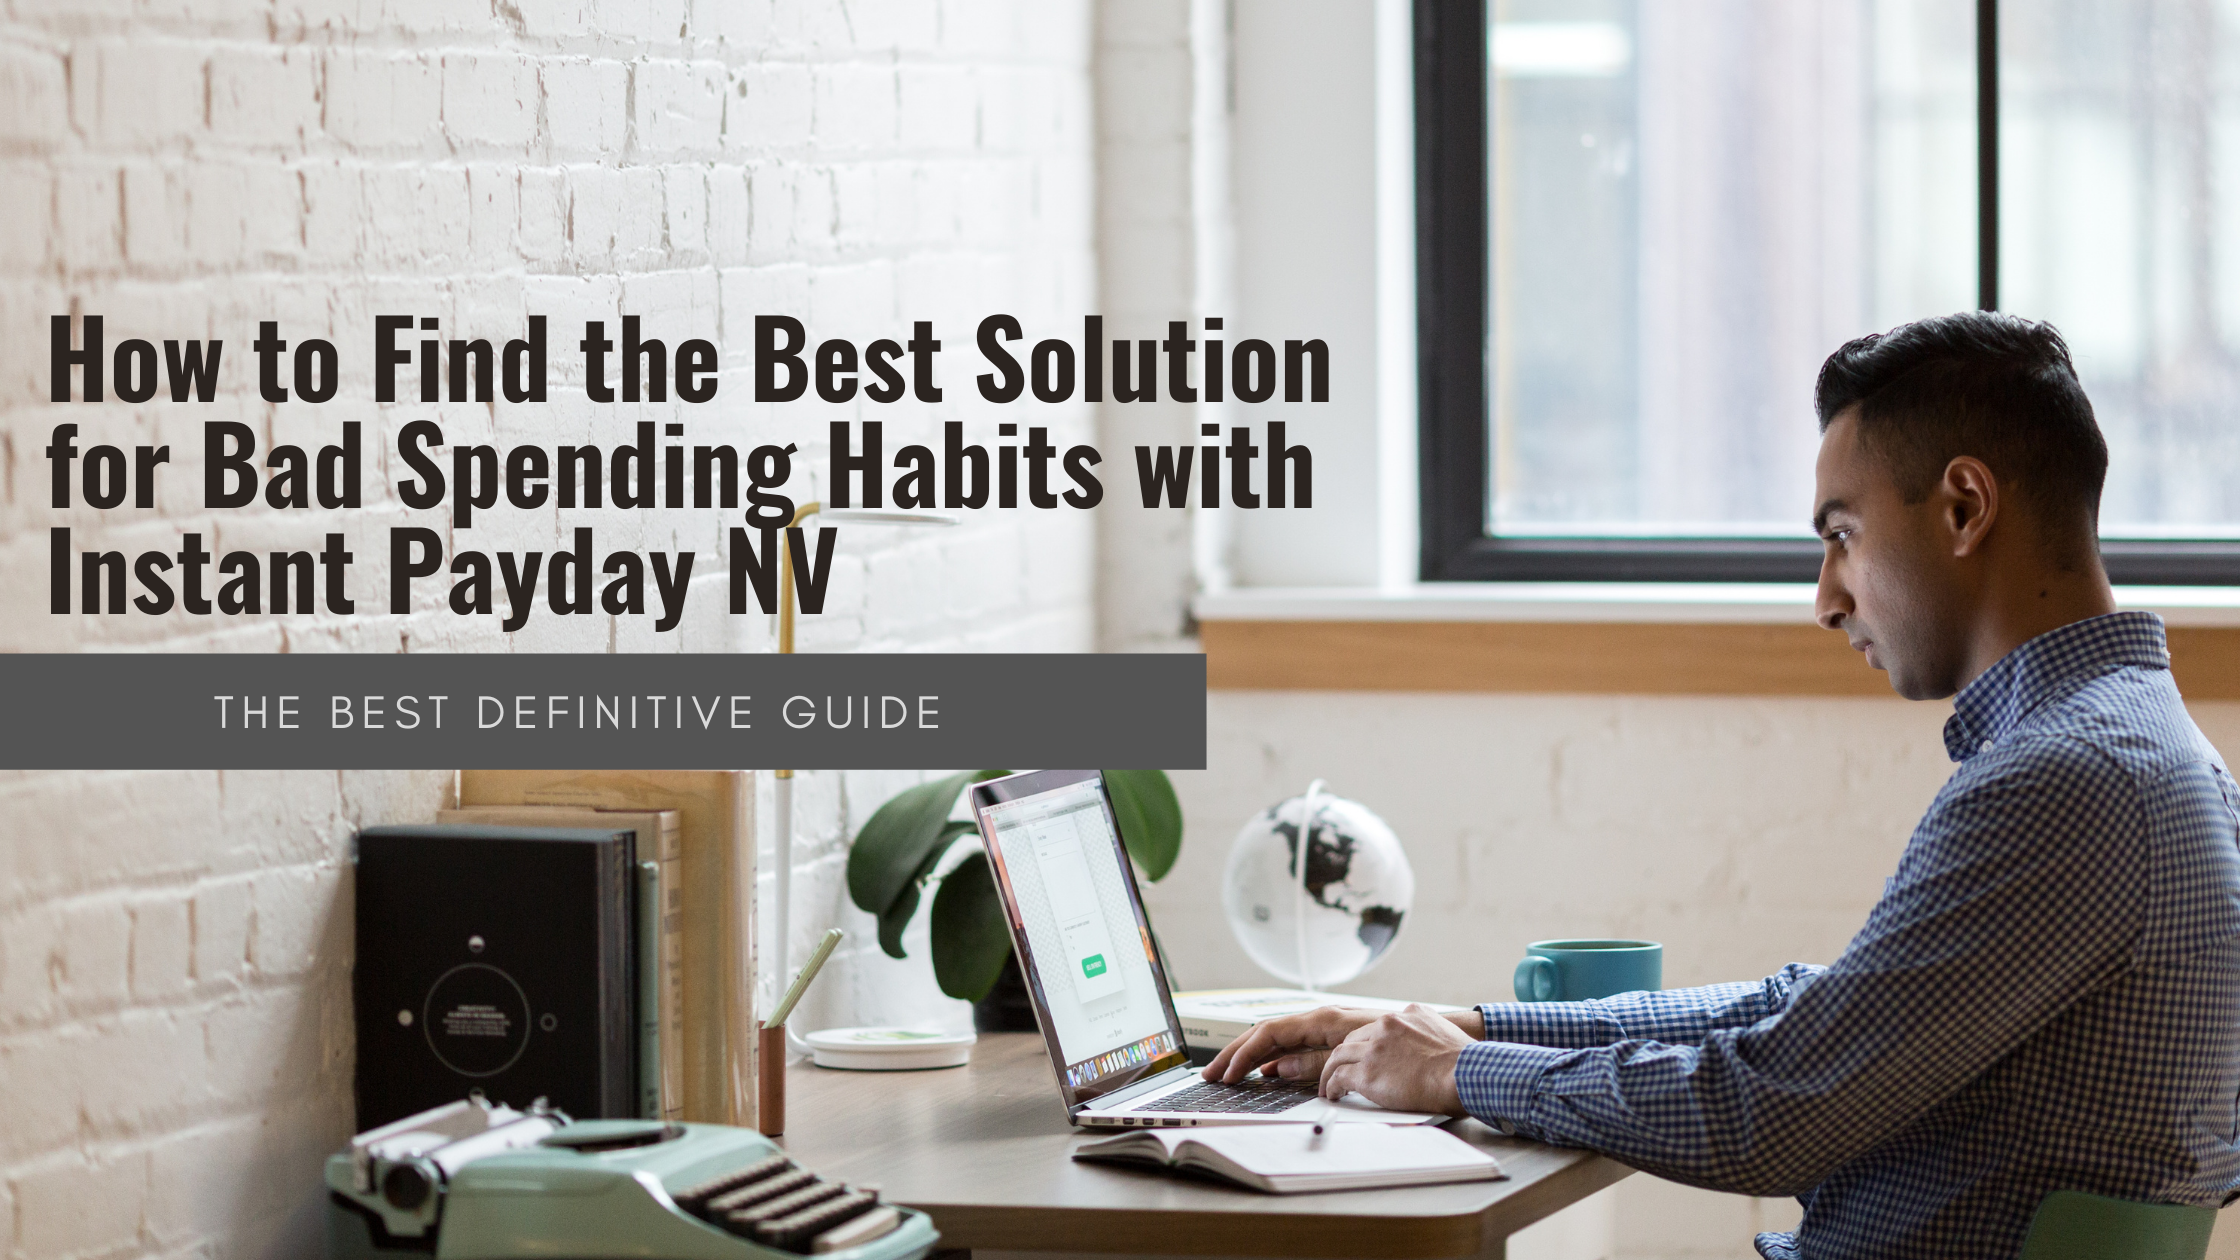 How to Find the Best Solution for Bad Spending Habits with Instant Payday NV